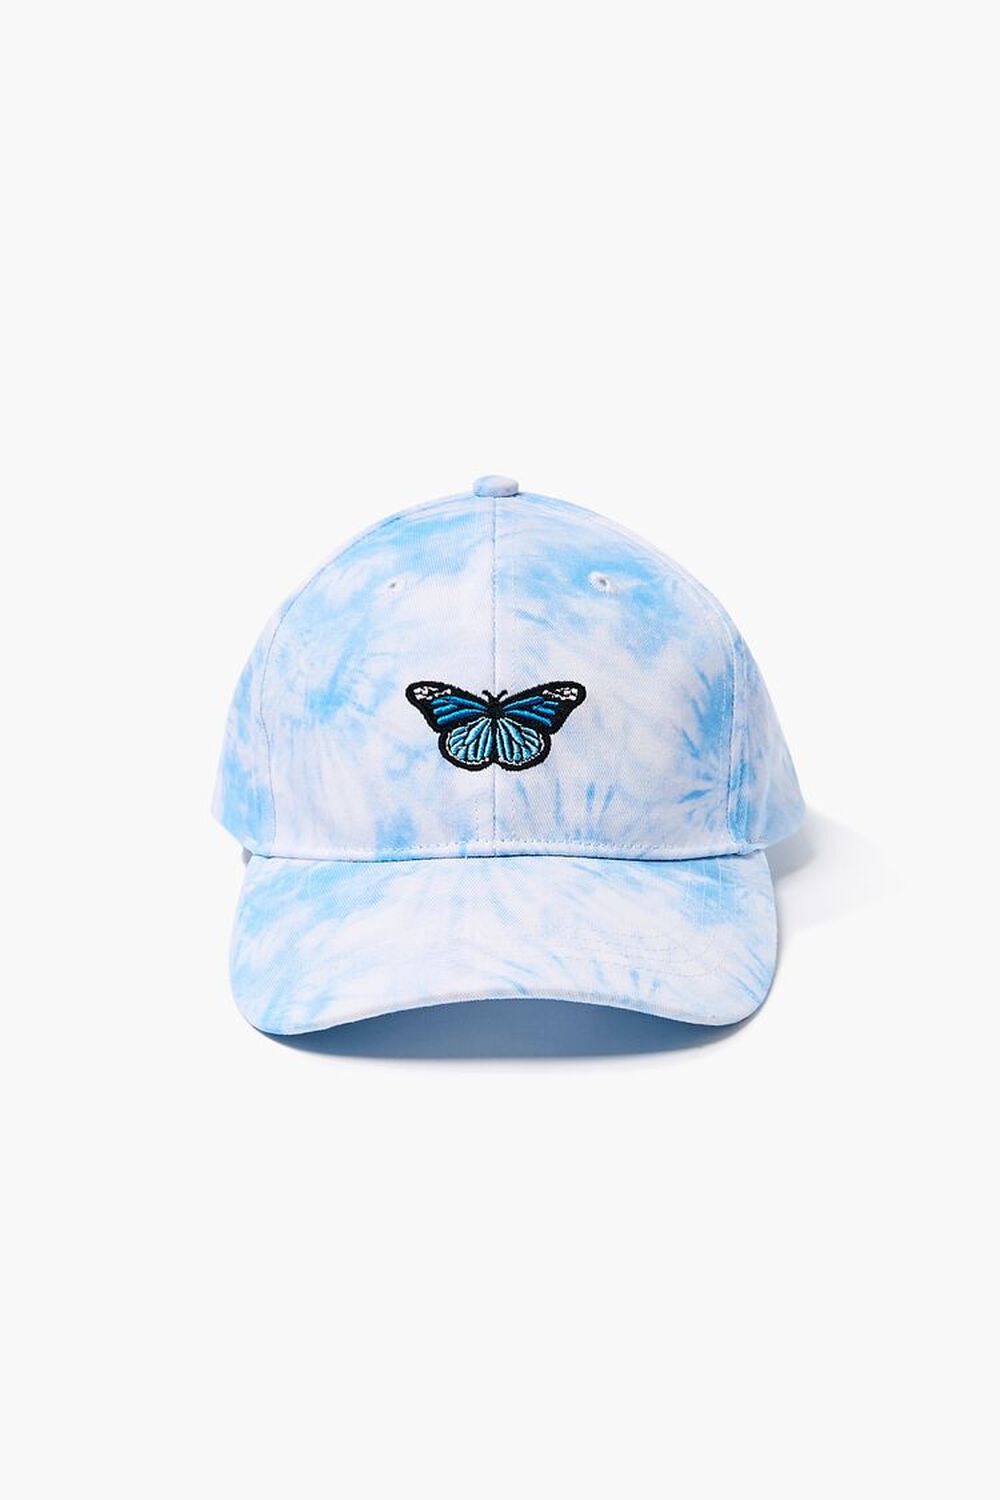 WHITE/BLUE Butterfly Embroidered Graphic Dad Cap, image 1